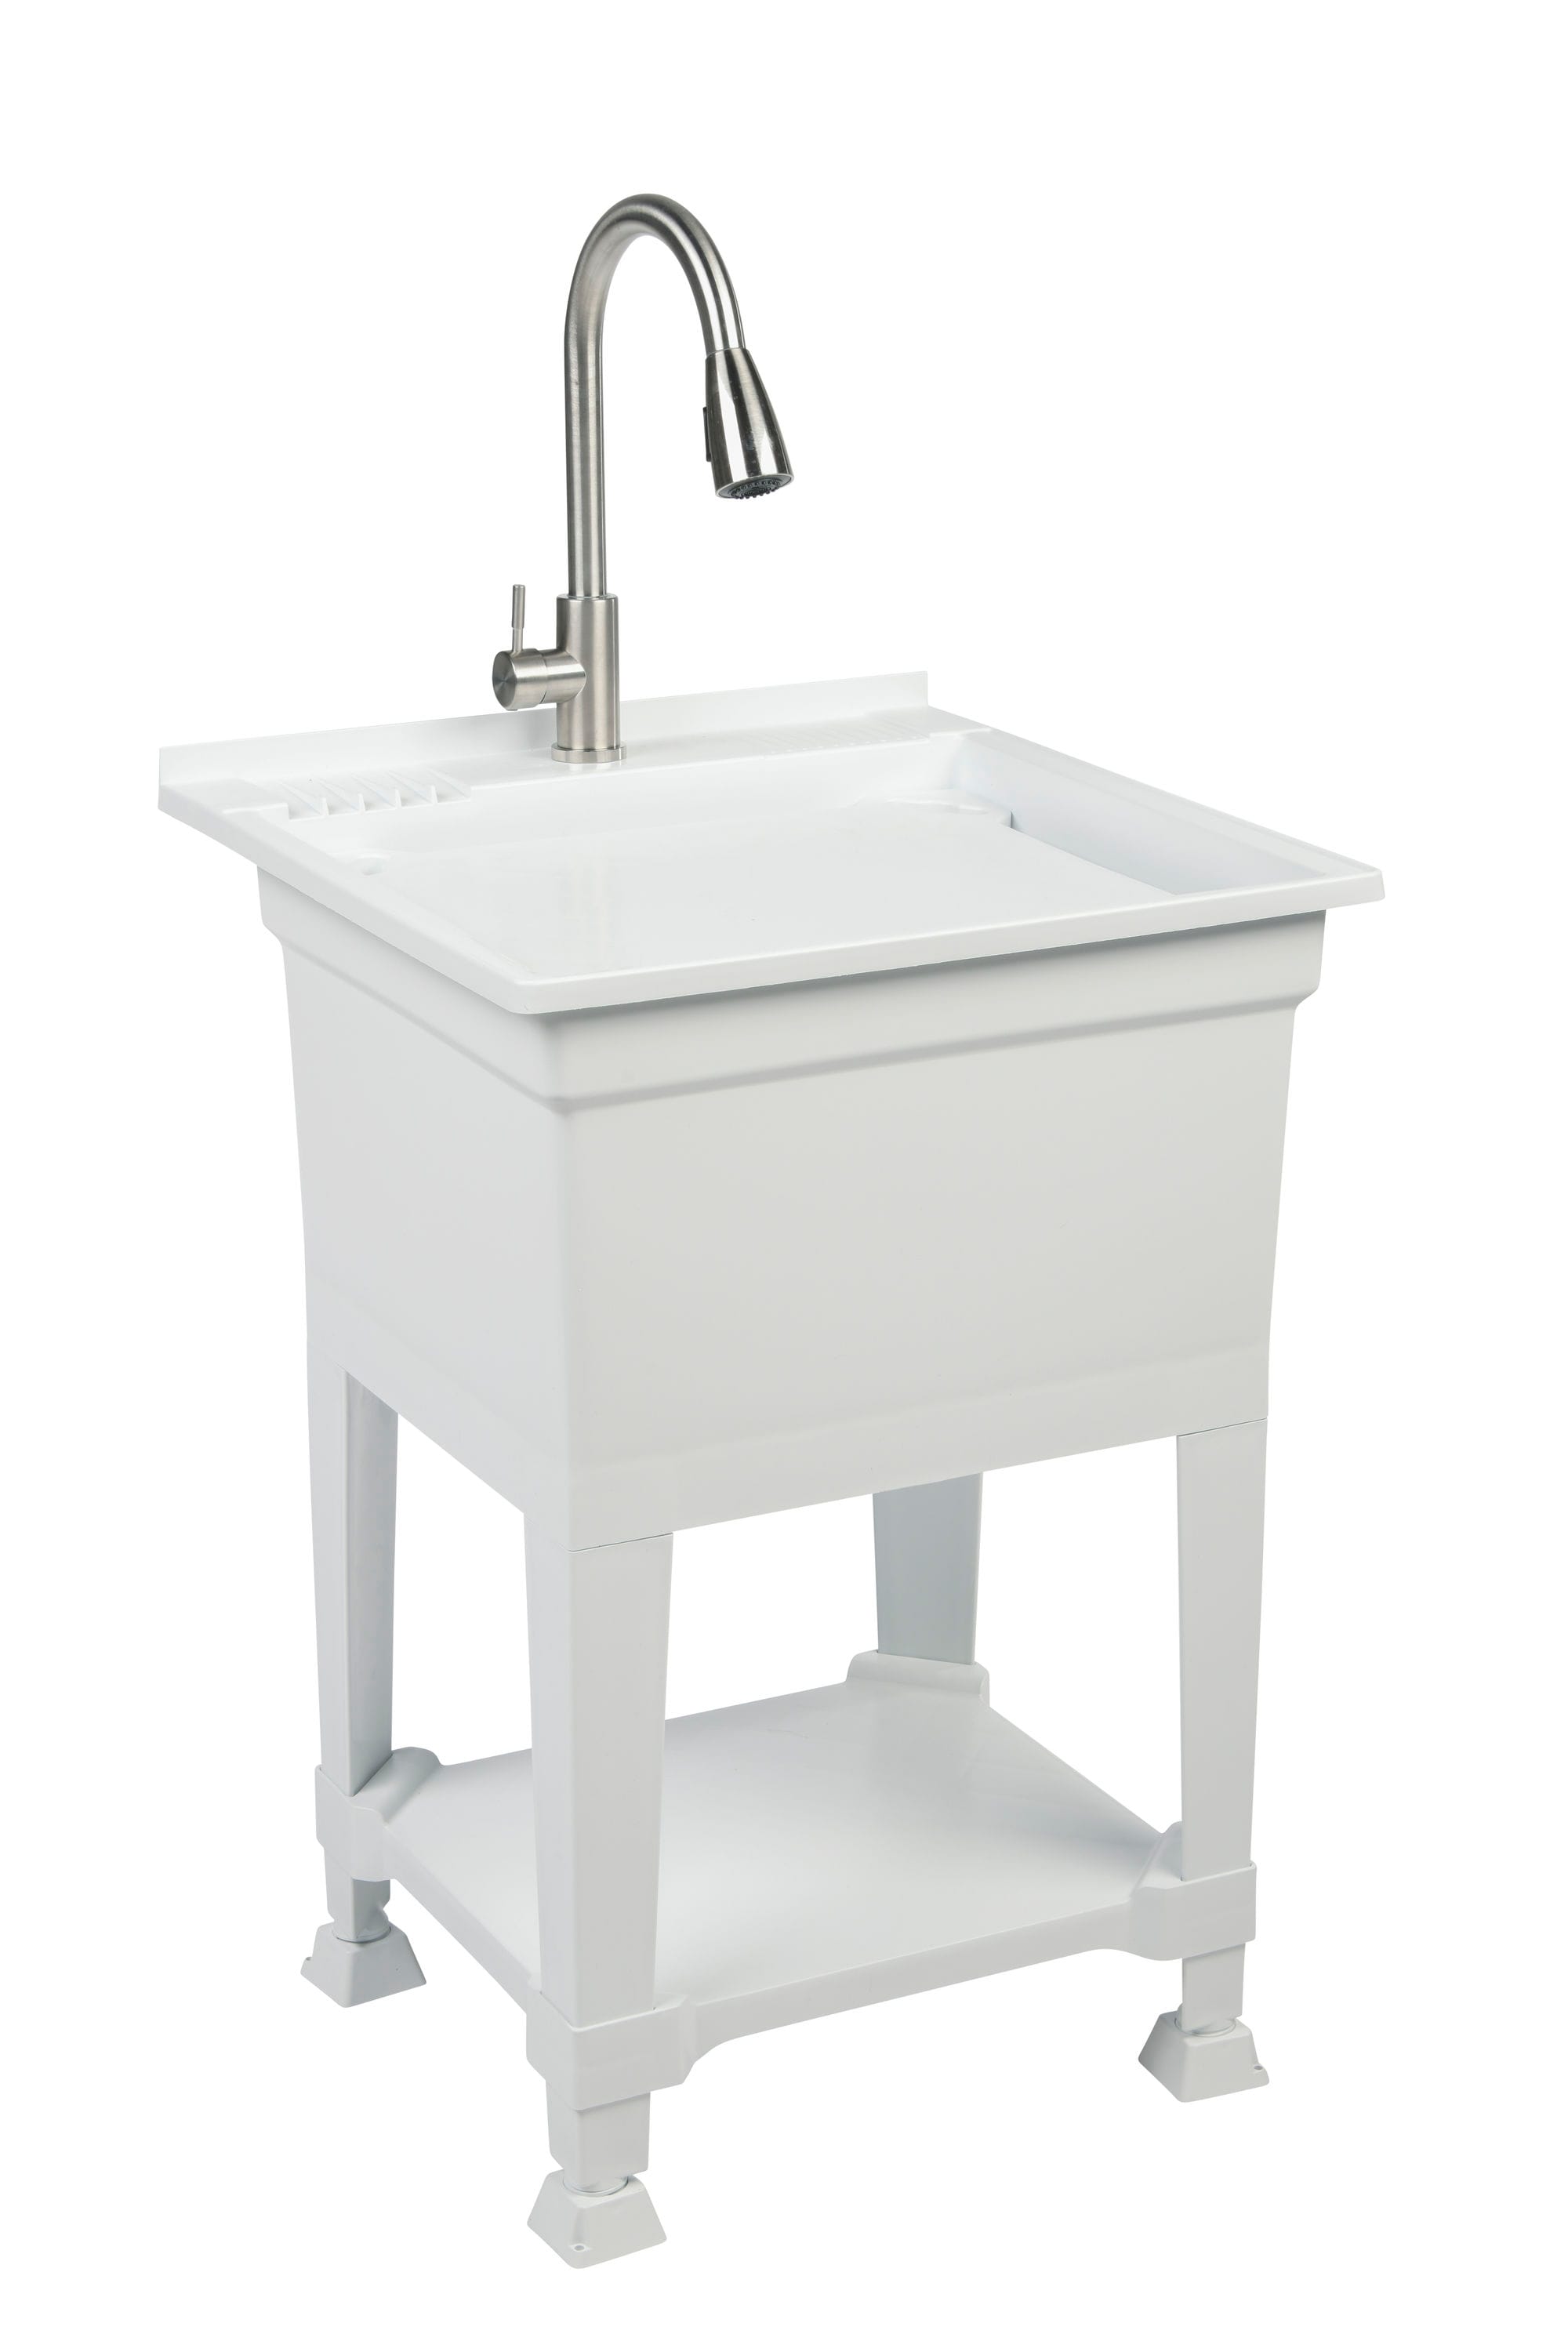 Style Selections 21.4-in x 24.1-in 1-Basin White Freestanding Utility Tub  with Drain with Faucet in the Utility Sinks department at